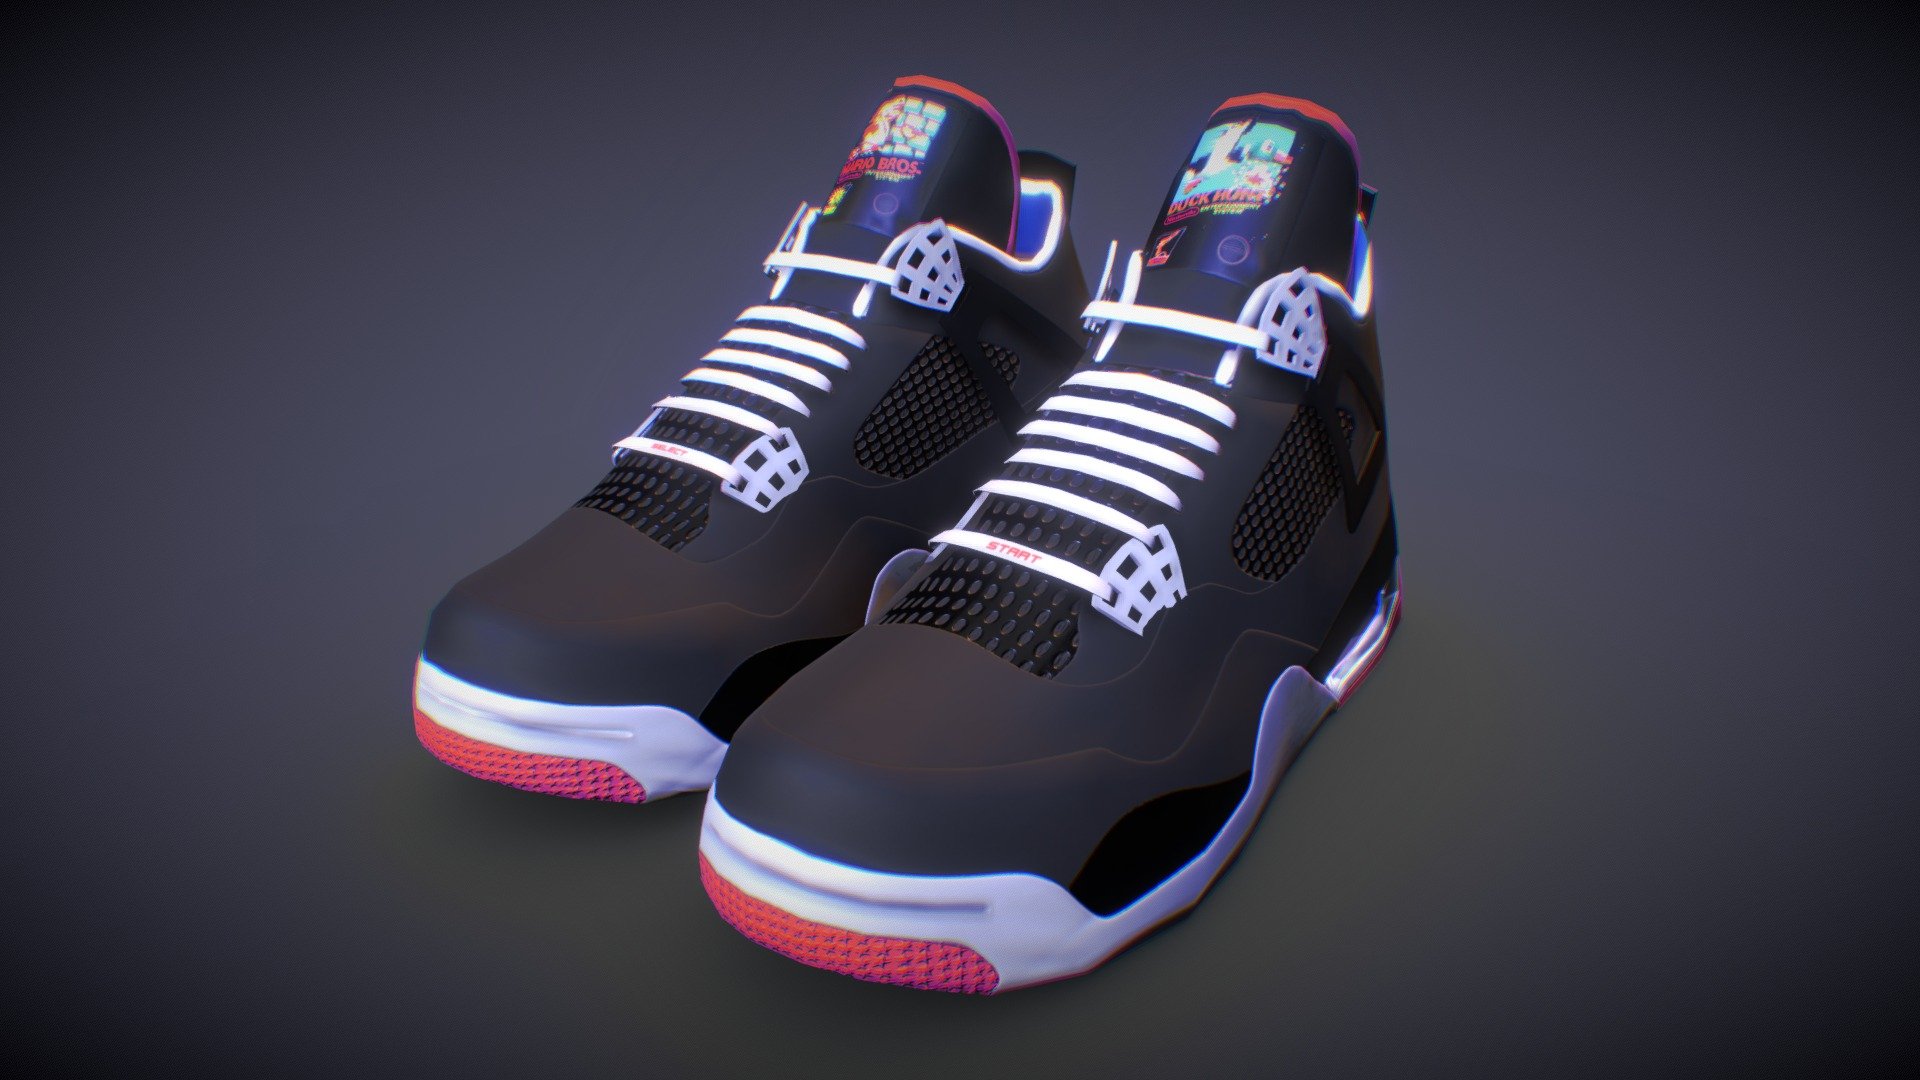 Low Poly Jordan Air Shoes.
A model made for a job's project, but I wanted to shared it with you 3d model